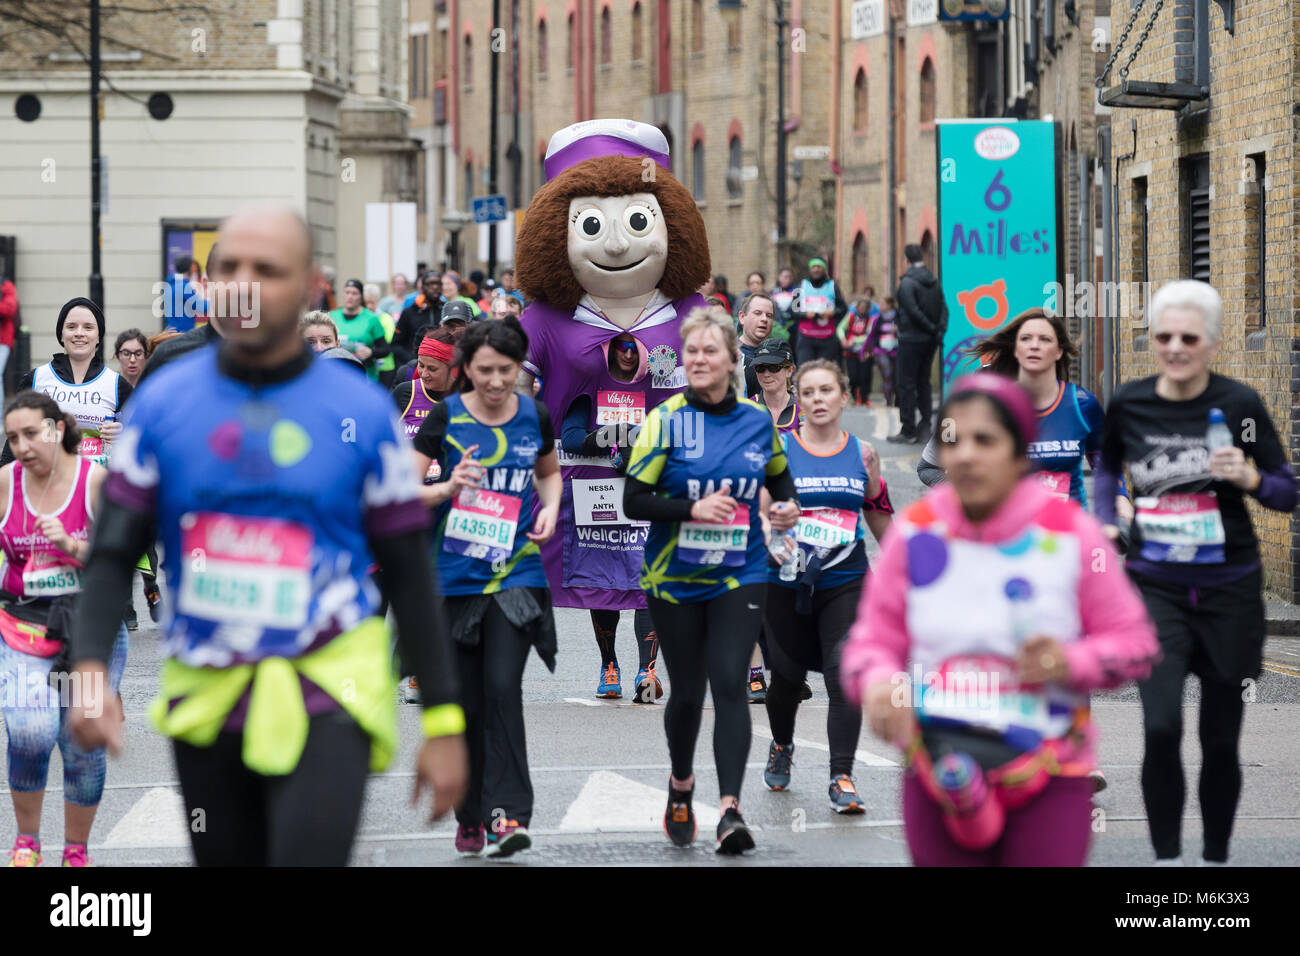 London, UK. 4th March 2018. Mass runners and a fancy dress runner as a giant doll in Wapping as they approach the half way point of the 2018 Vitality Big Half Marathon. Credit: Vickie Flores/Alamy Live News Stock Photo